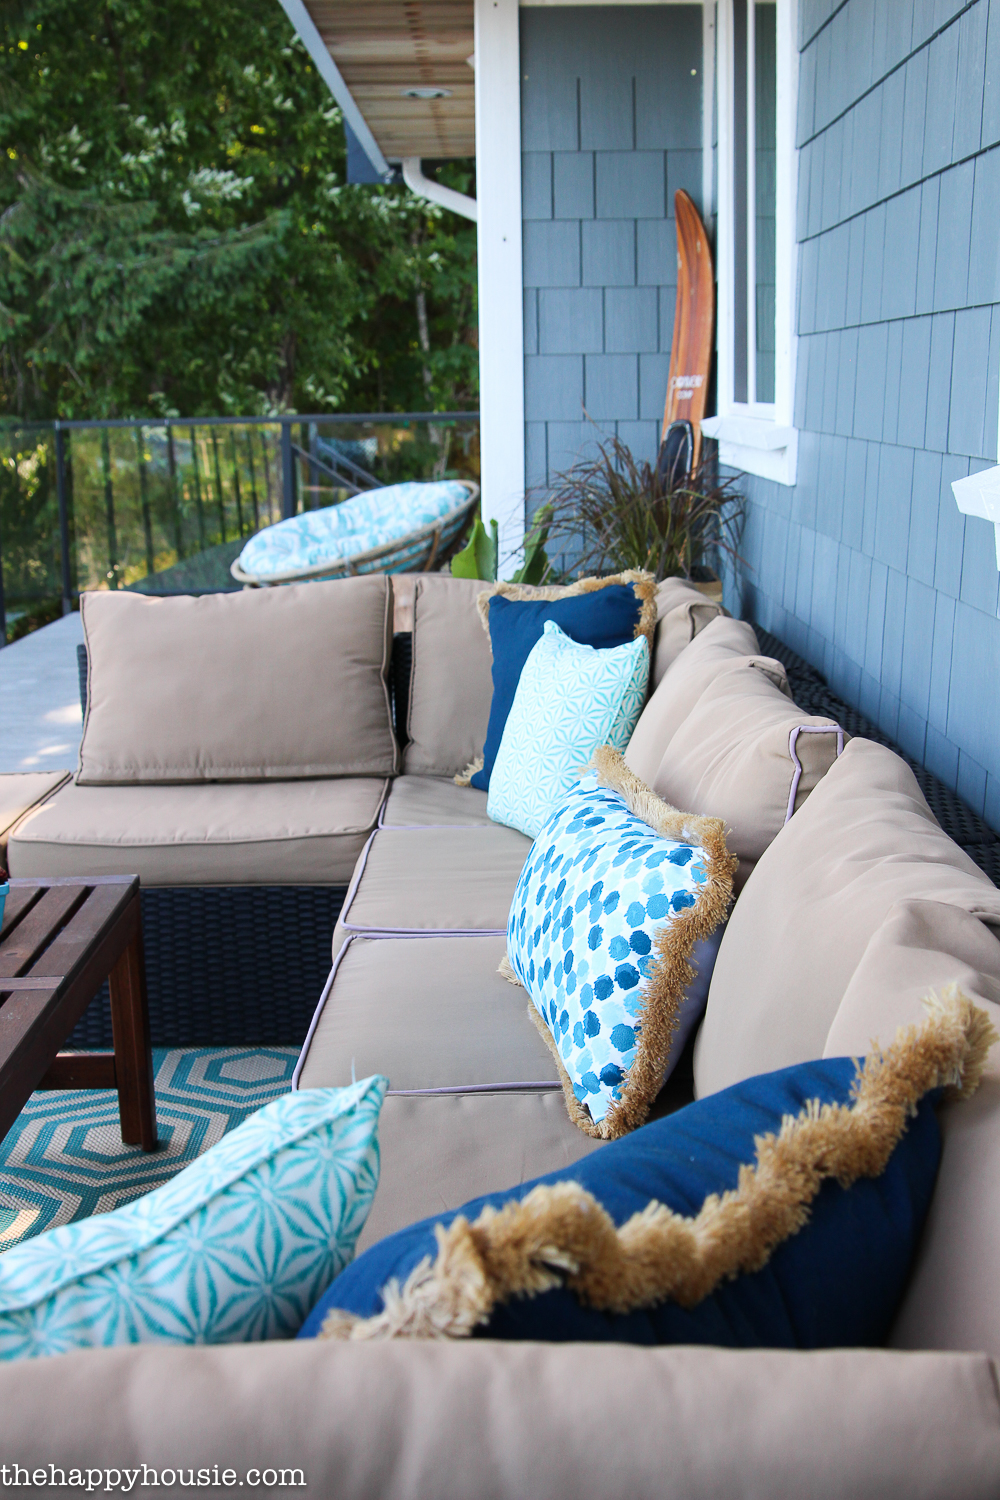 The outdoor couch and pillows.